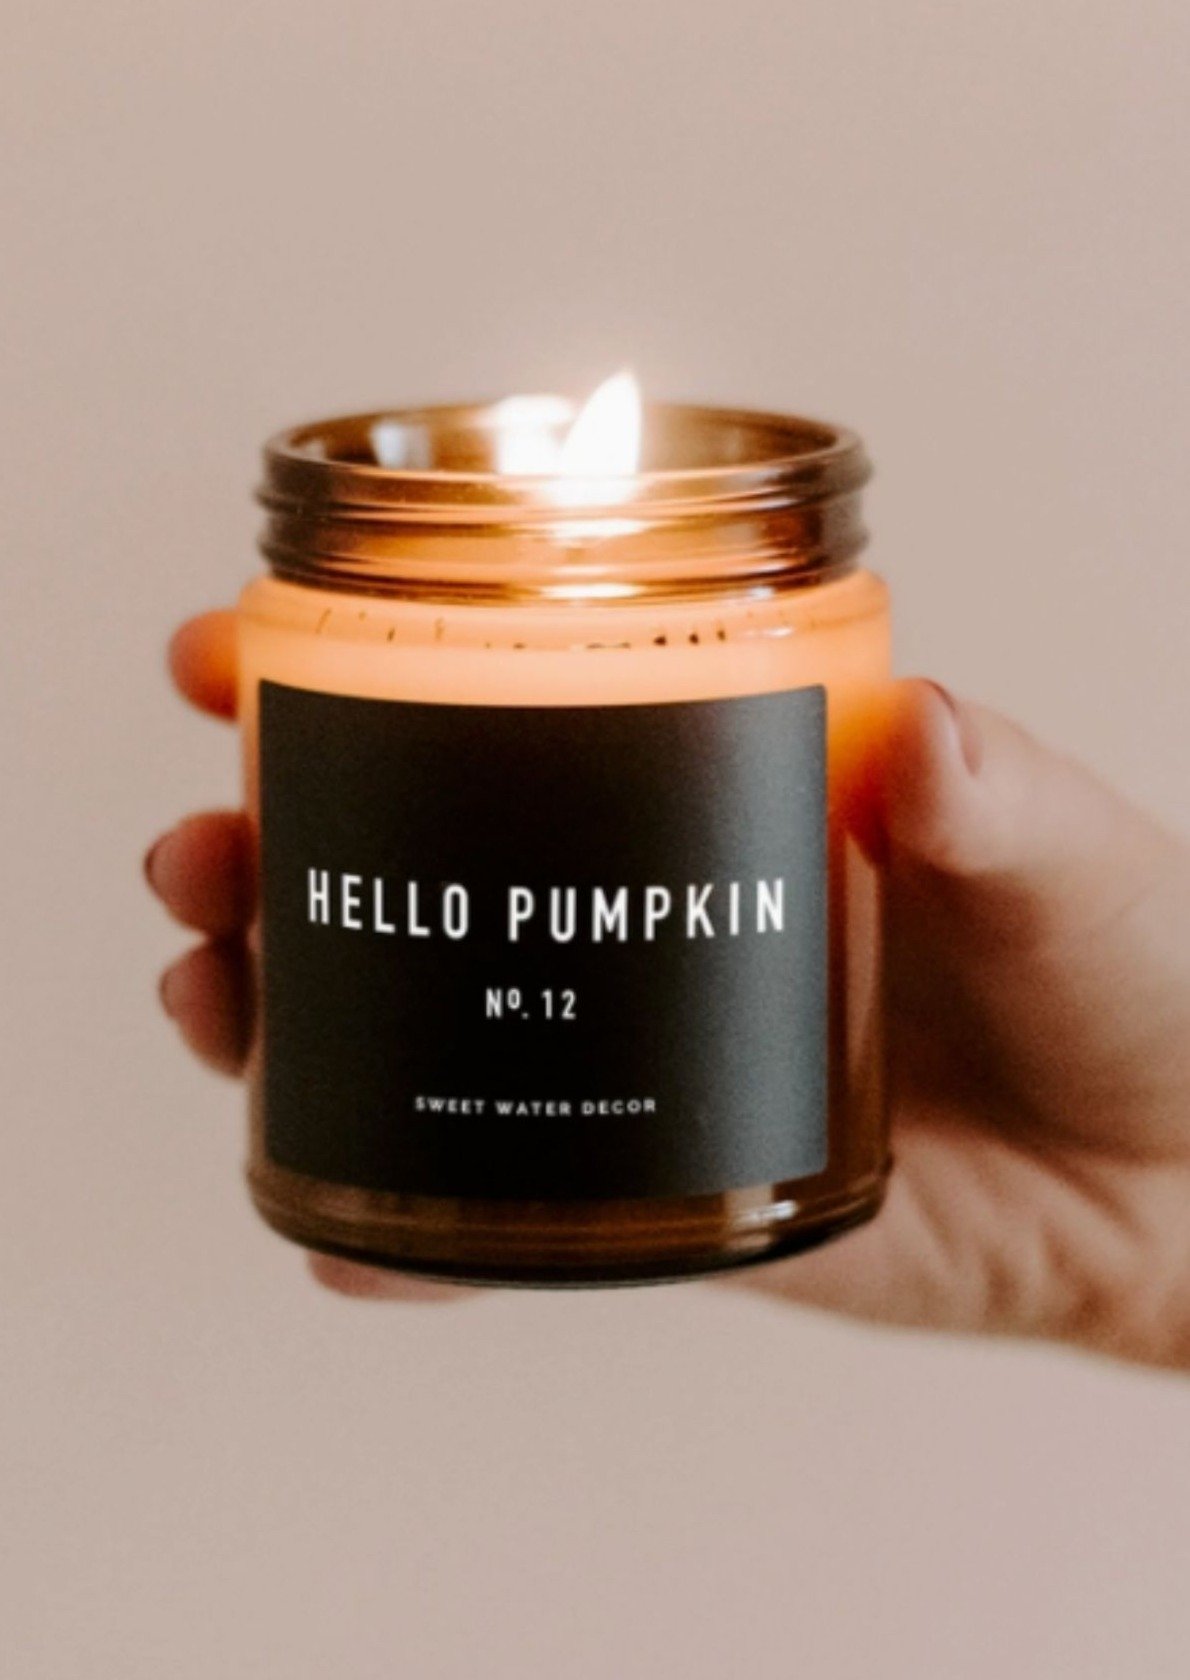 Hello Pumpkin Scented Soy Candle Home Listing Sweet Water Decor